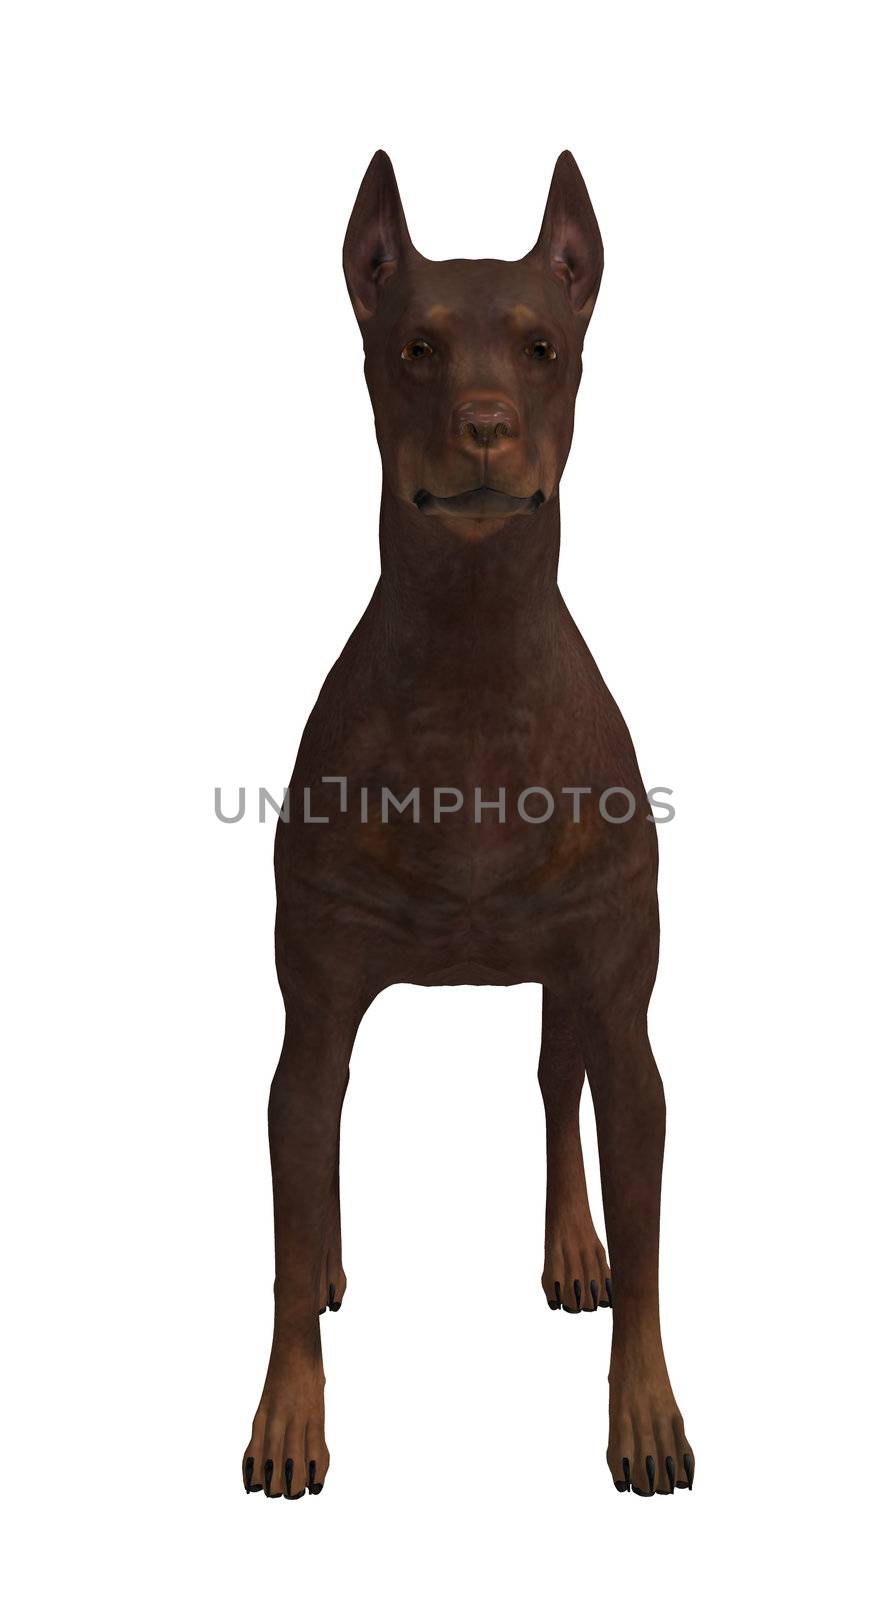 A brown dog standing